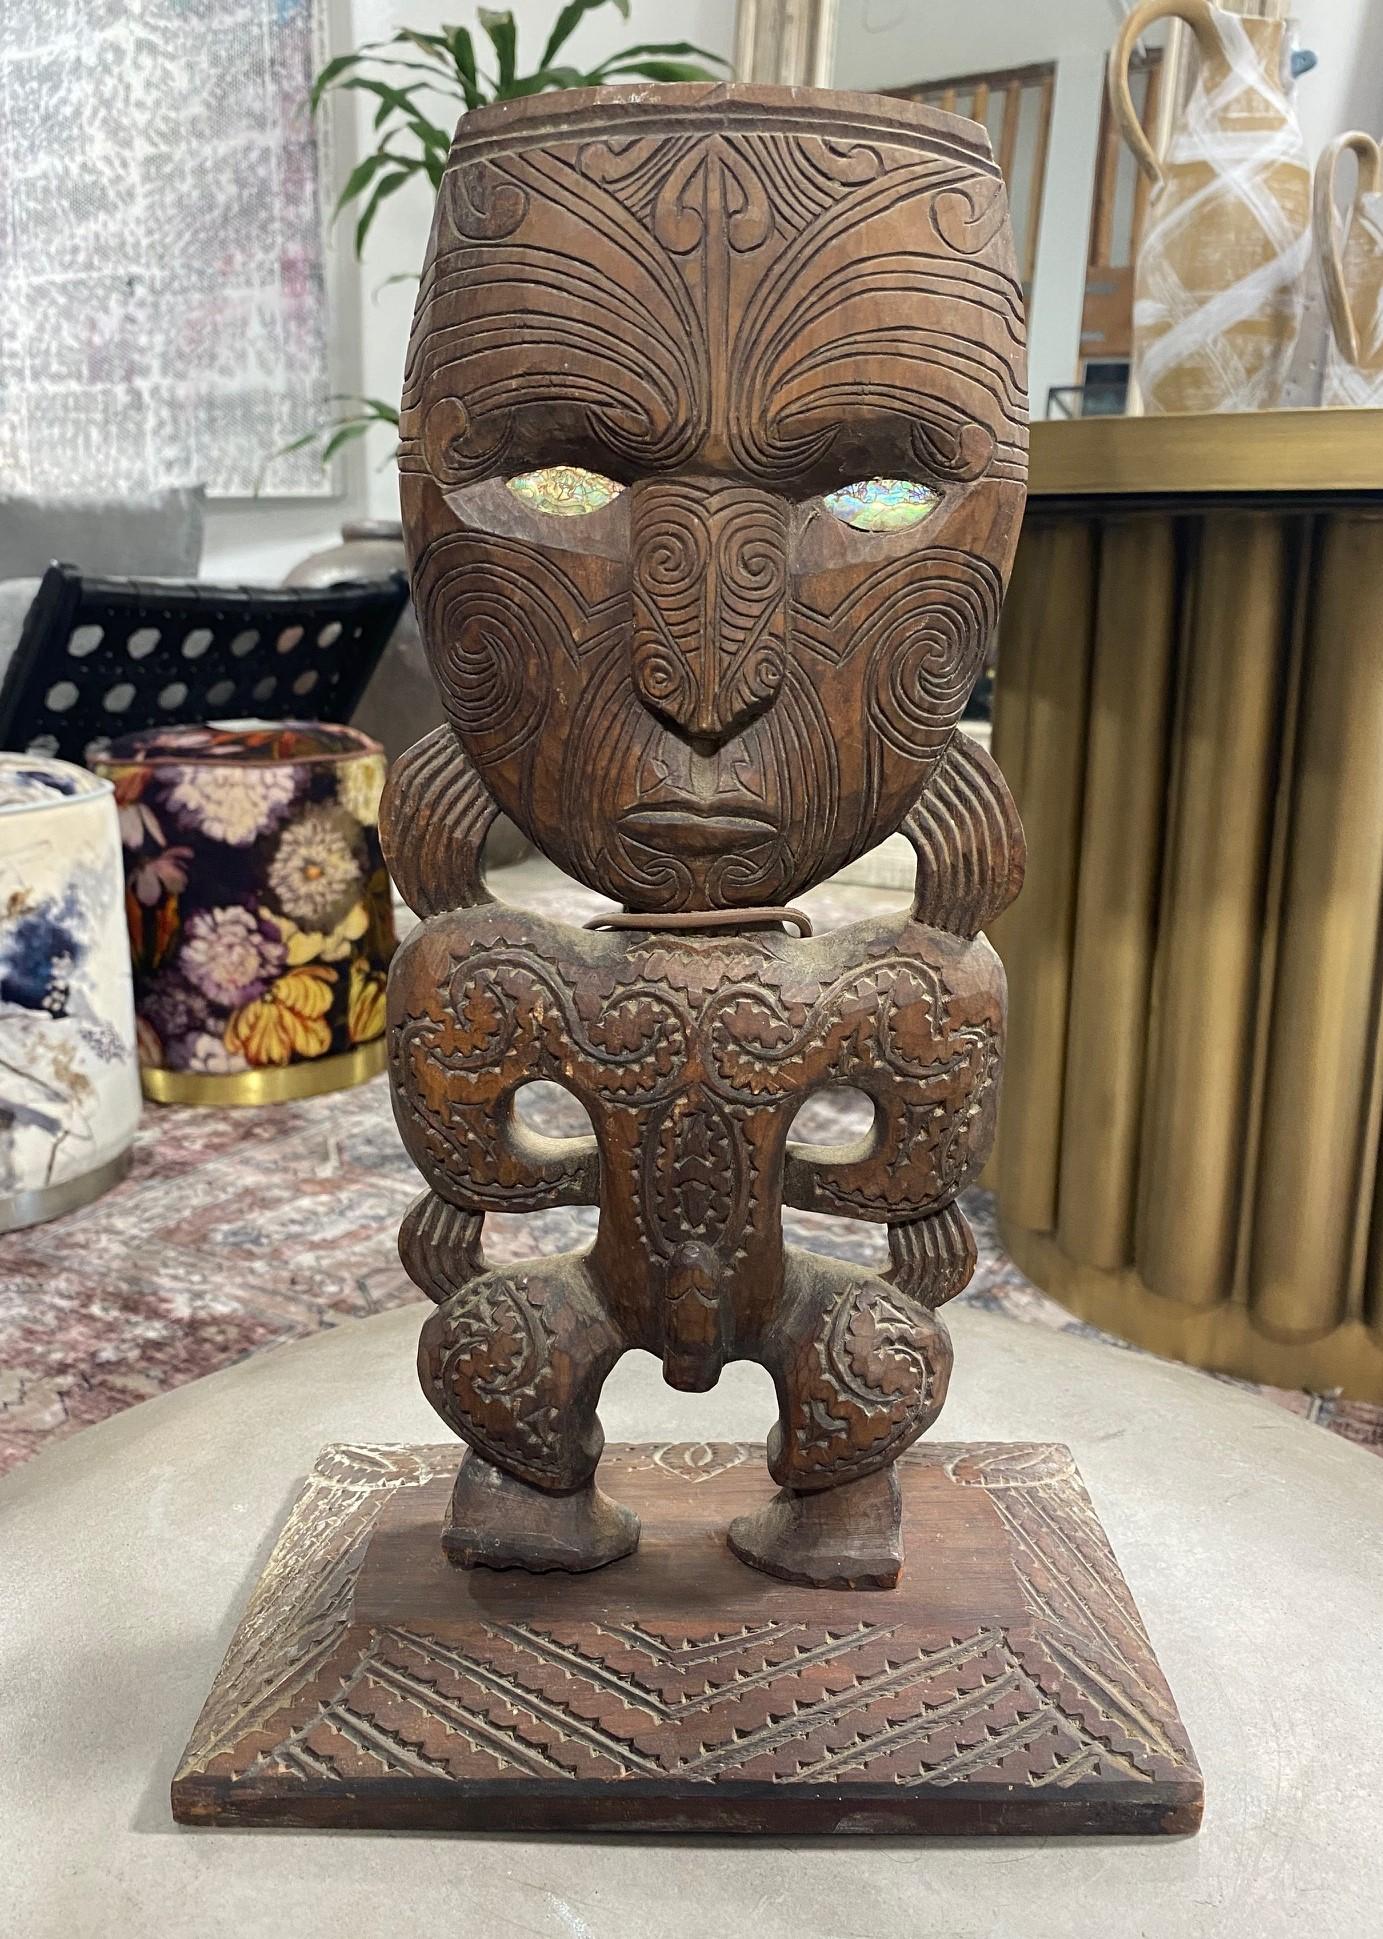 A wonderful and intricately hand-carved wood Maori Tekoteko (Teko Teko) Ancestor Totem figure on a custom stand. Quite mesmerizing and engaging work. Gable Tekoteko figures are often based on founding or prominent ancestor family members - often the